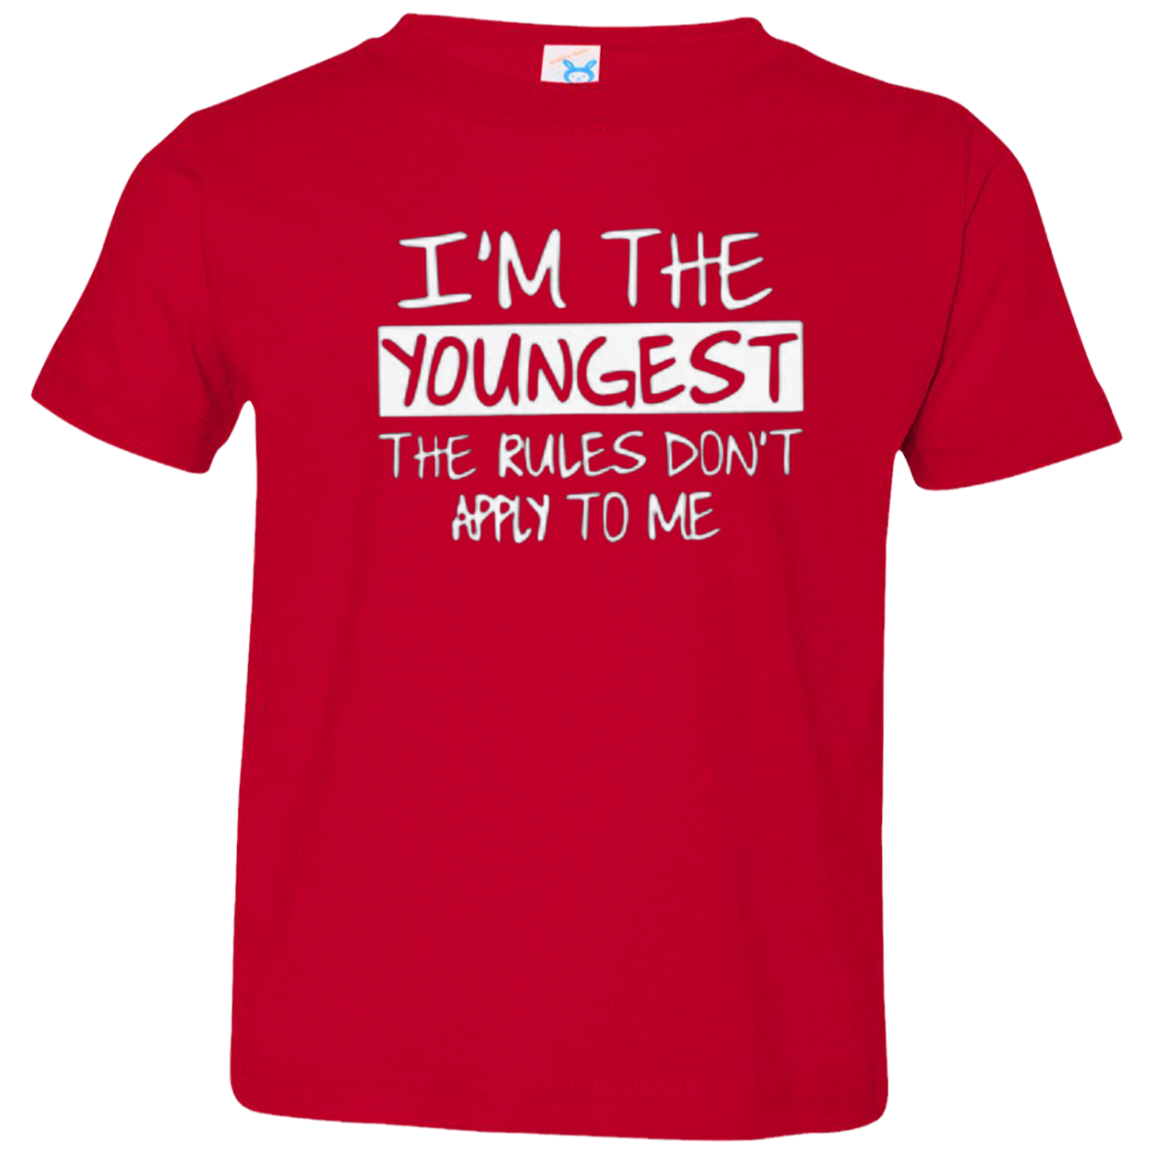 I'm the youngest! Tee